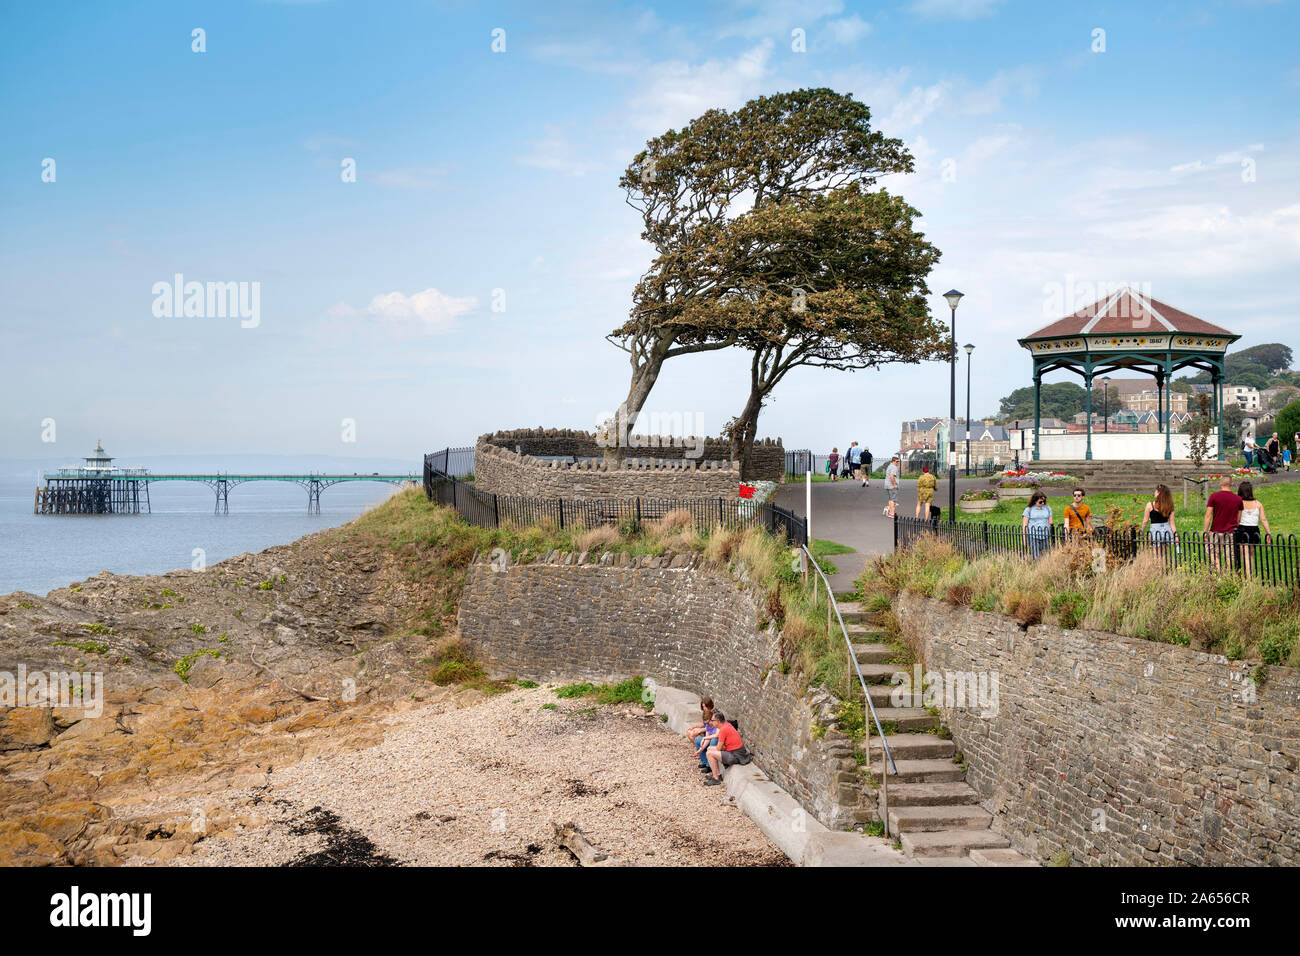 The seaside town of Clevedon in North Somerset, UK Stock Photo